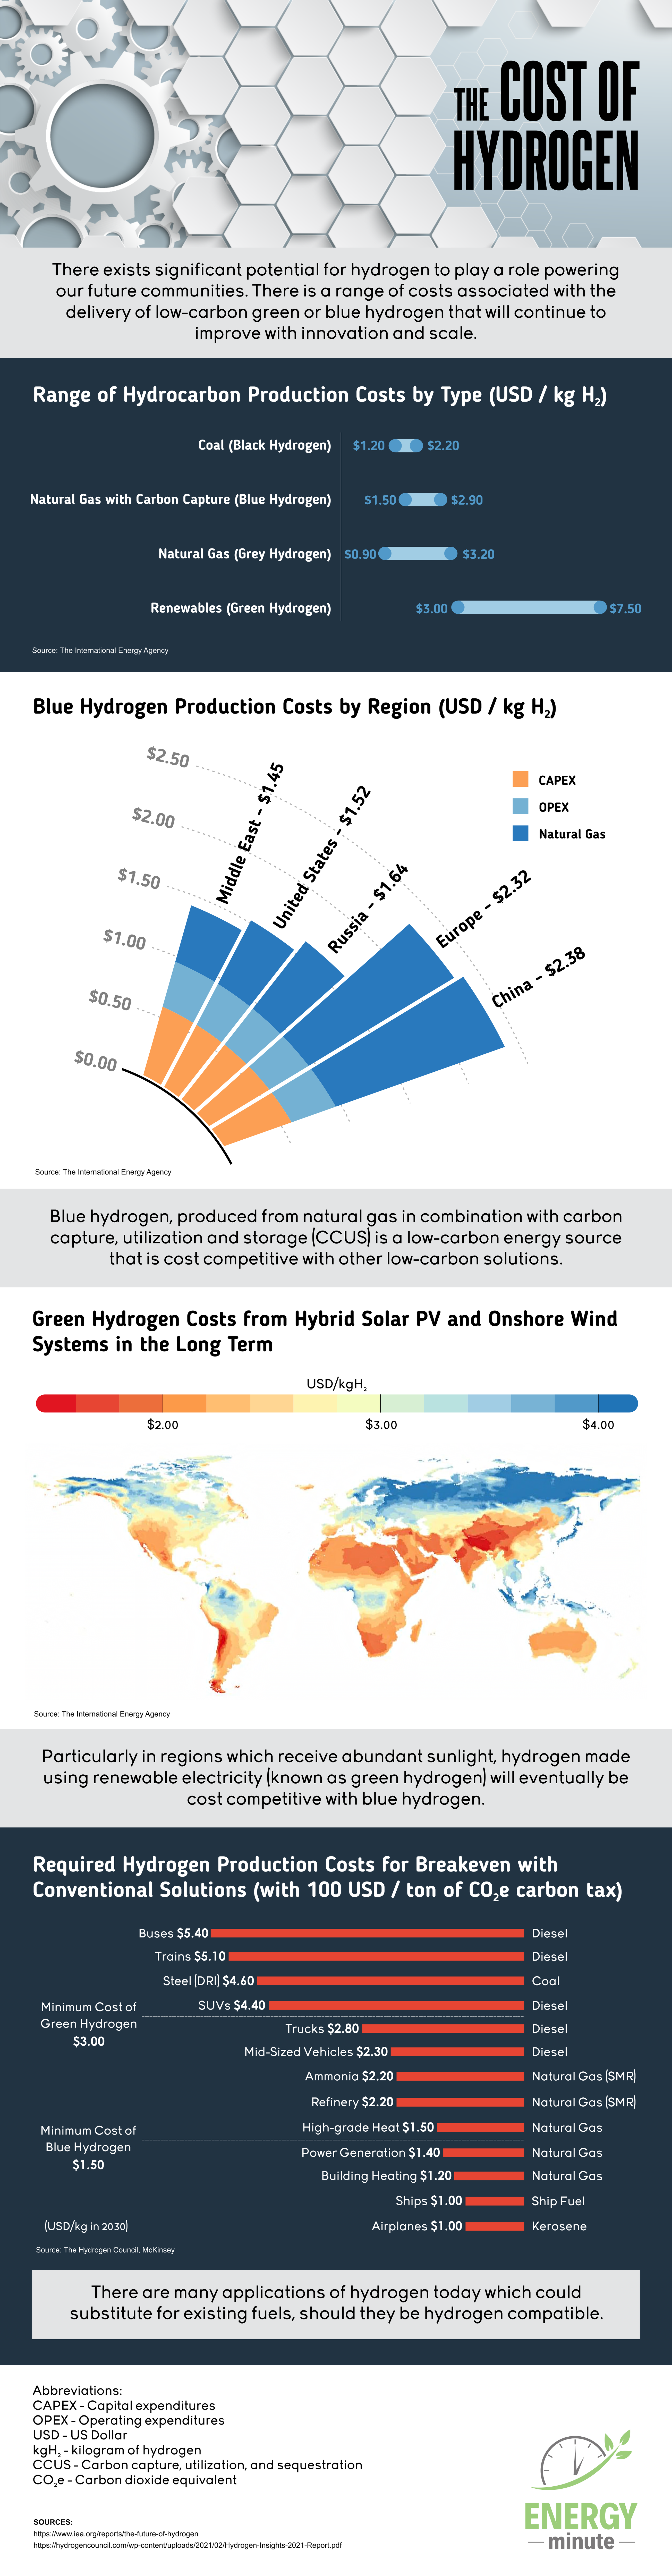 The Production Costs of Hydrogen Across the Globe